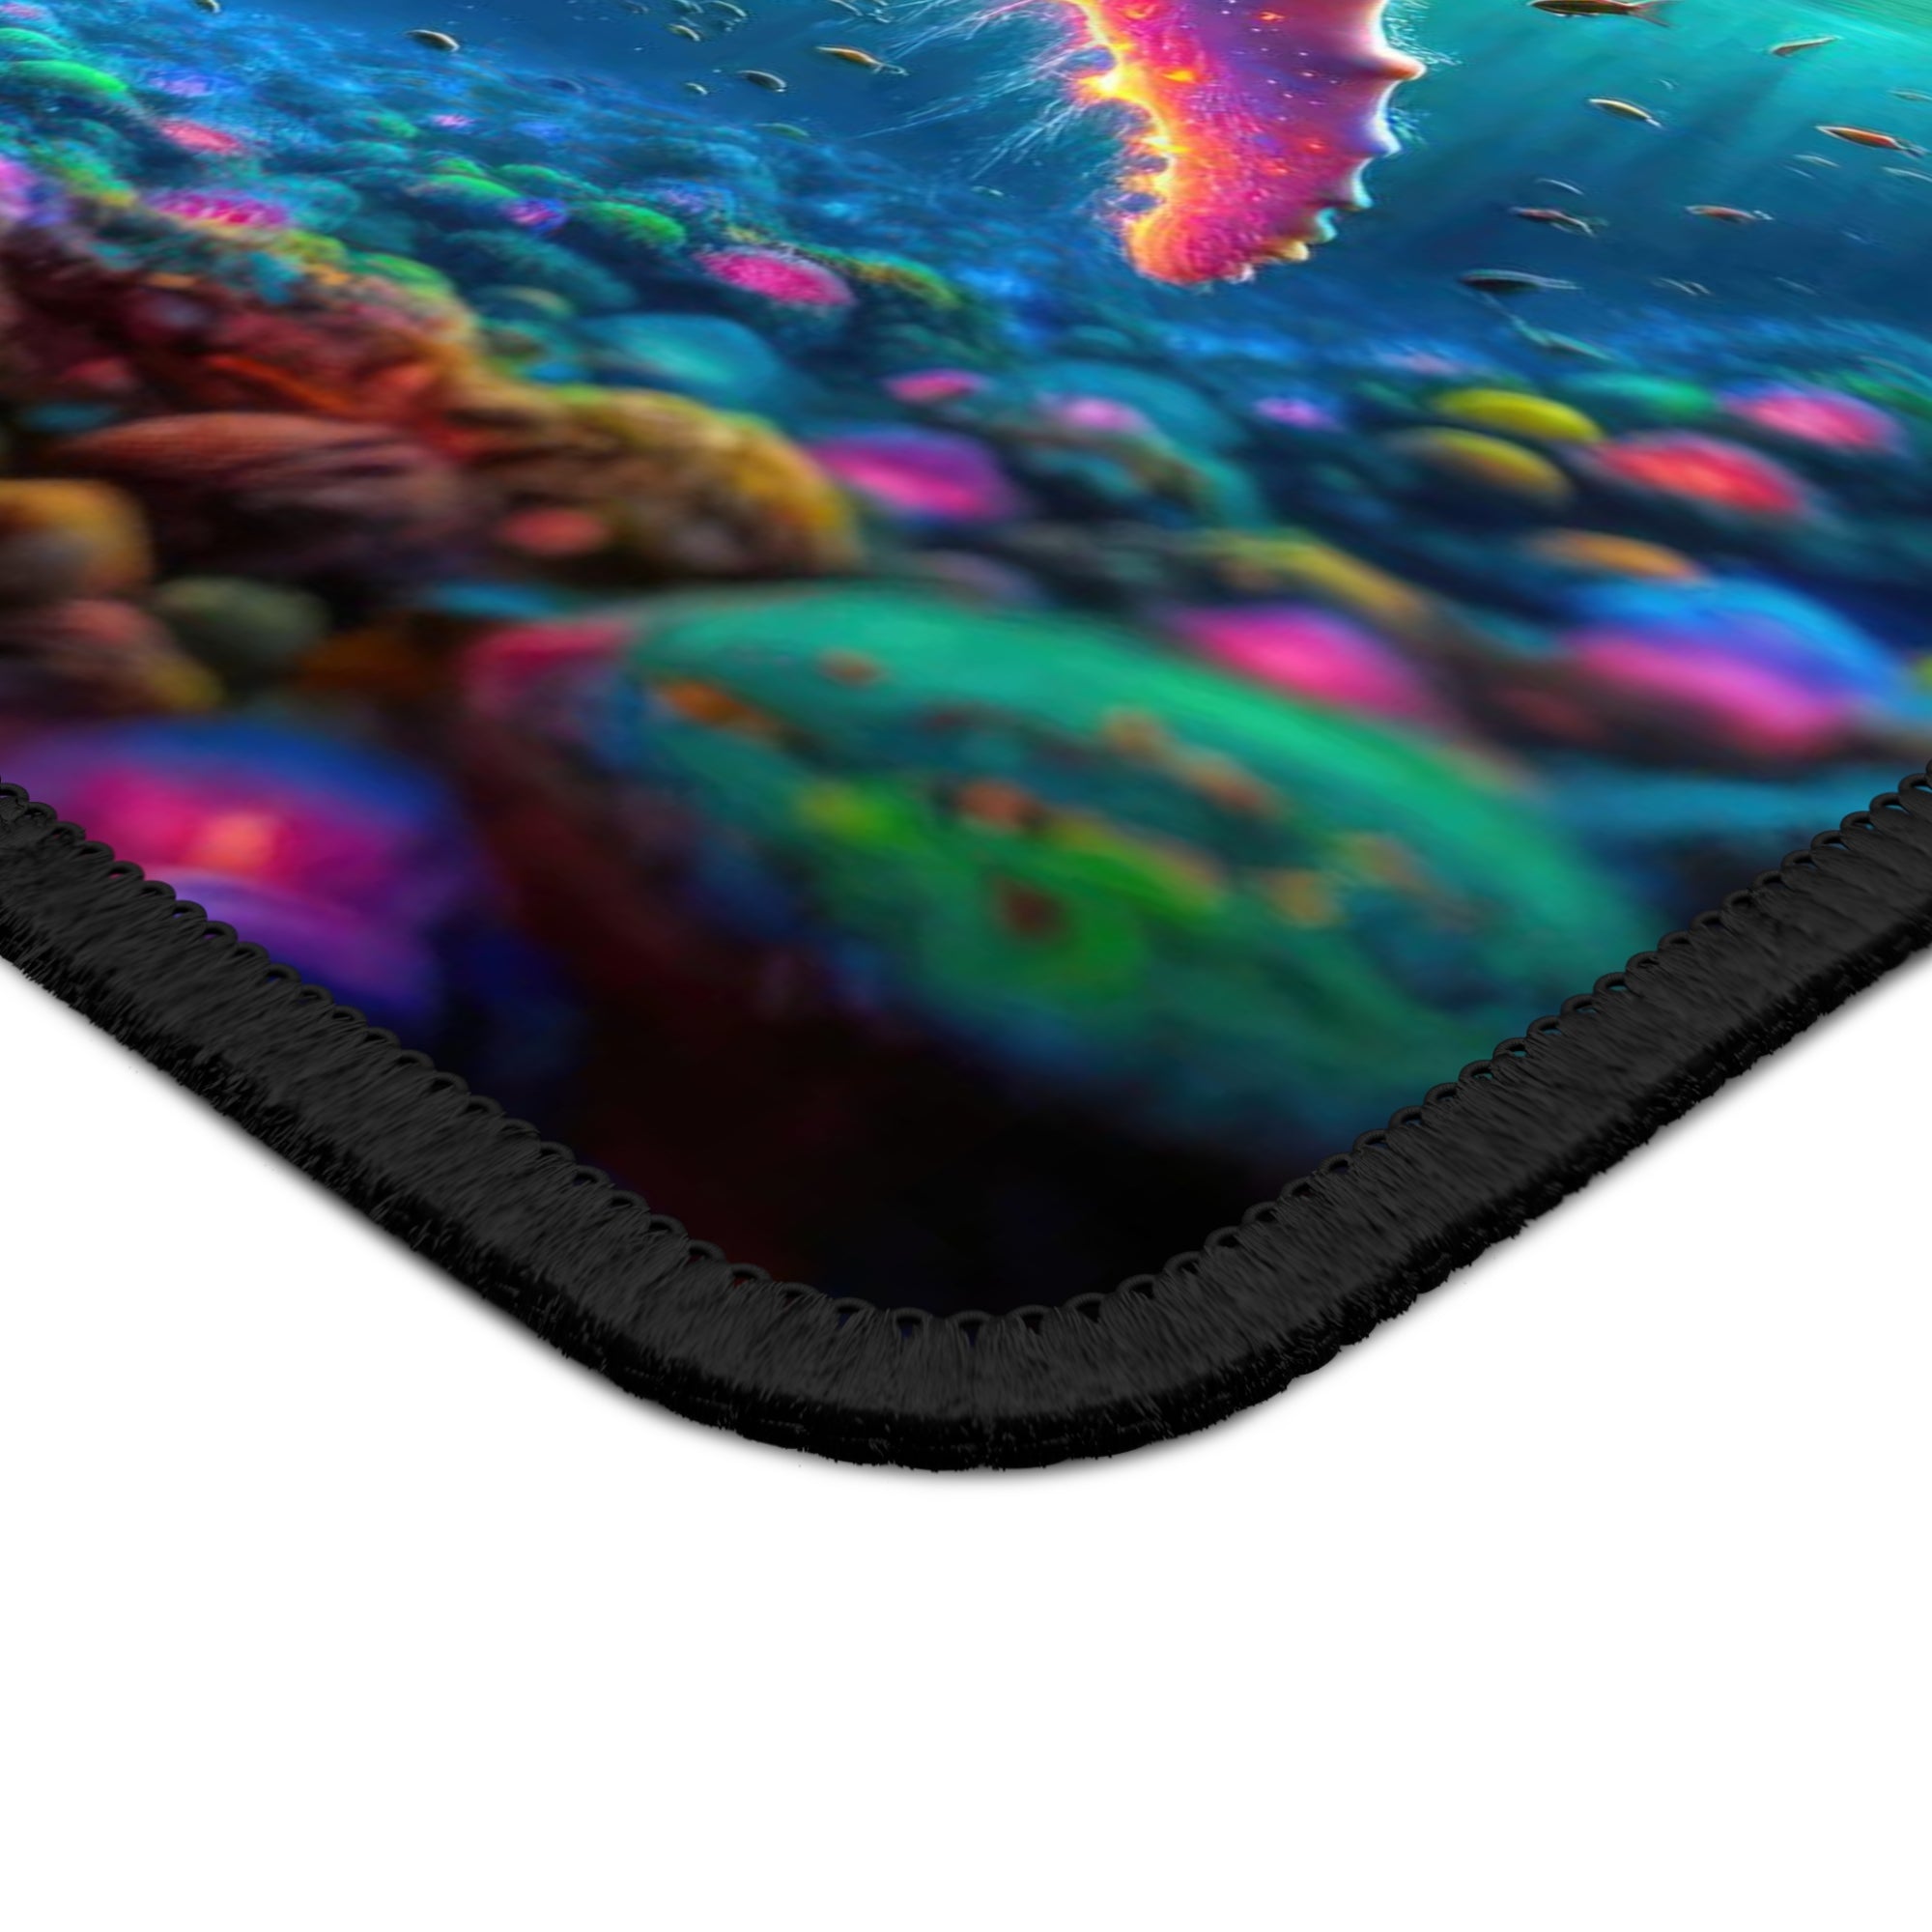 Cosmic Dance of the Humpback Whale Gaming Mouse Pad